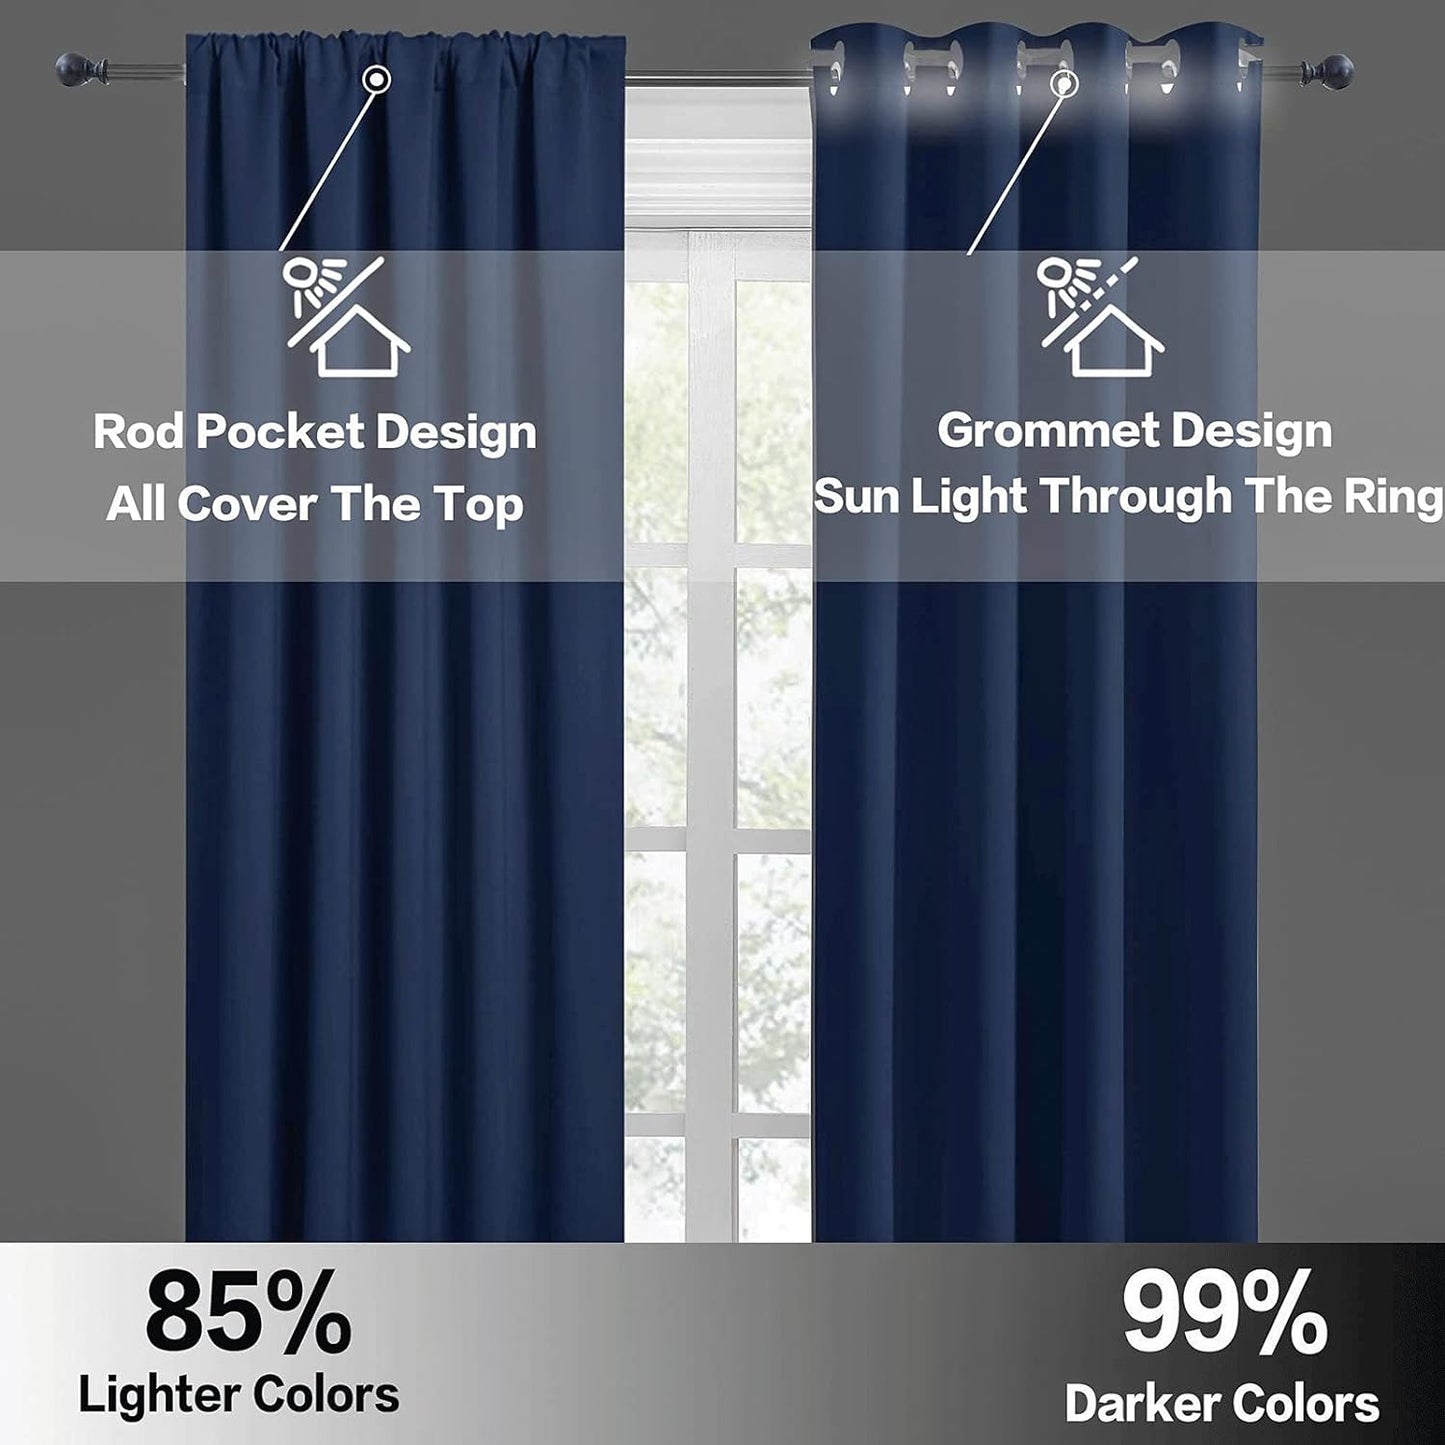 RYB HOME Blackout Kitchen Curtains 2 Panels Set, Room Darkening Small Window Treatment Energy Smart Drapes Full Privacy Protection for Laundry Bedroom Bathroom, Navy Blue, W42 X L63 Inch, 2 Panels  RYB HOME   